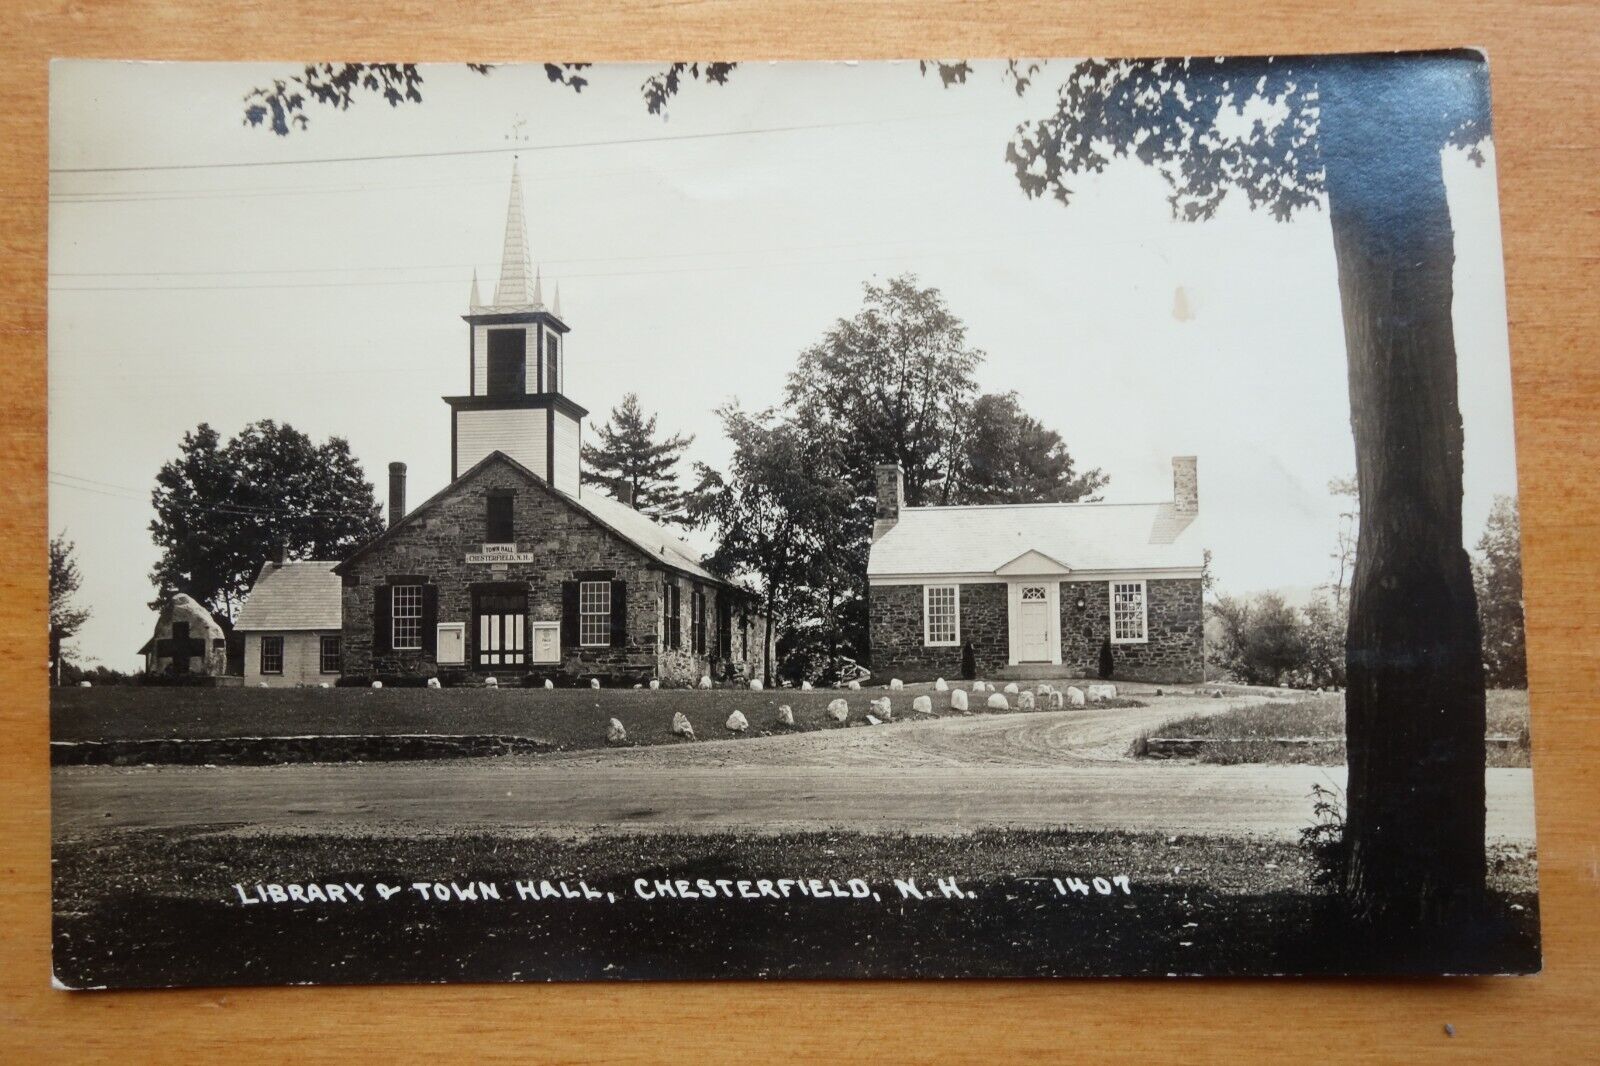 Library and Town Hall, Chesterfield NH real photo postcard rppc